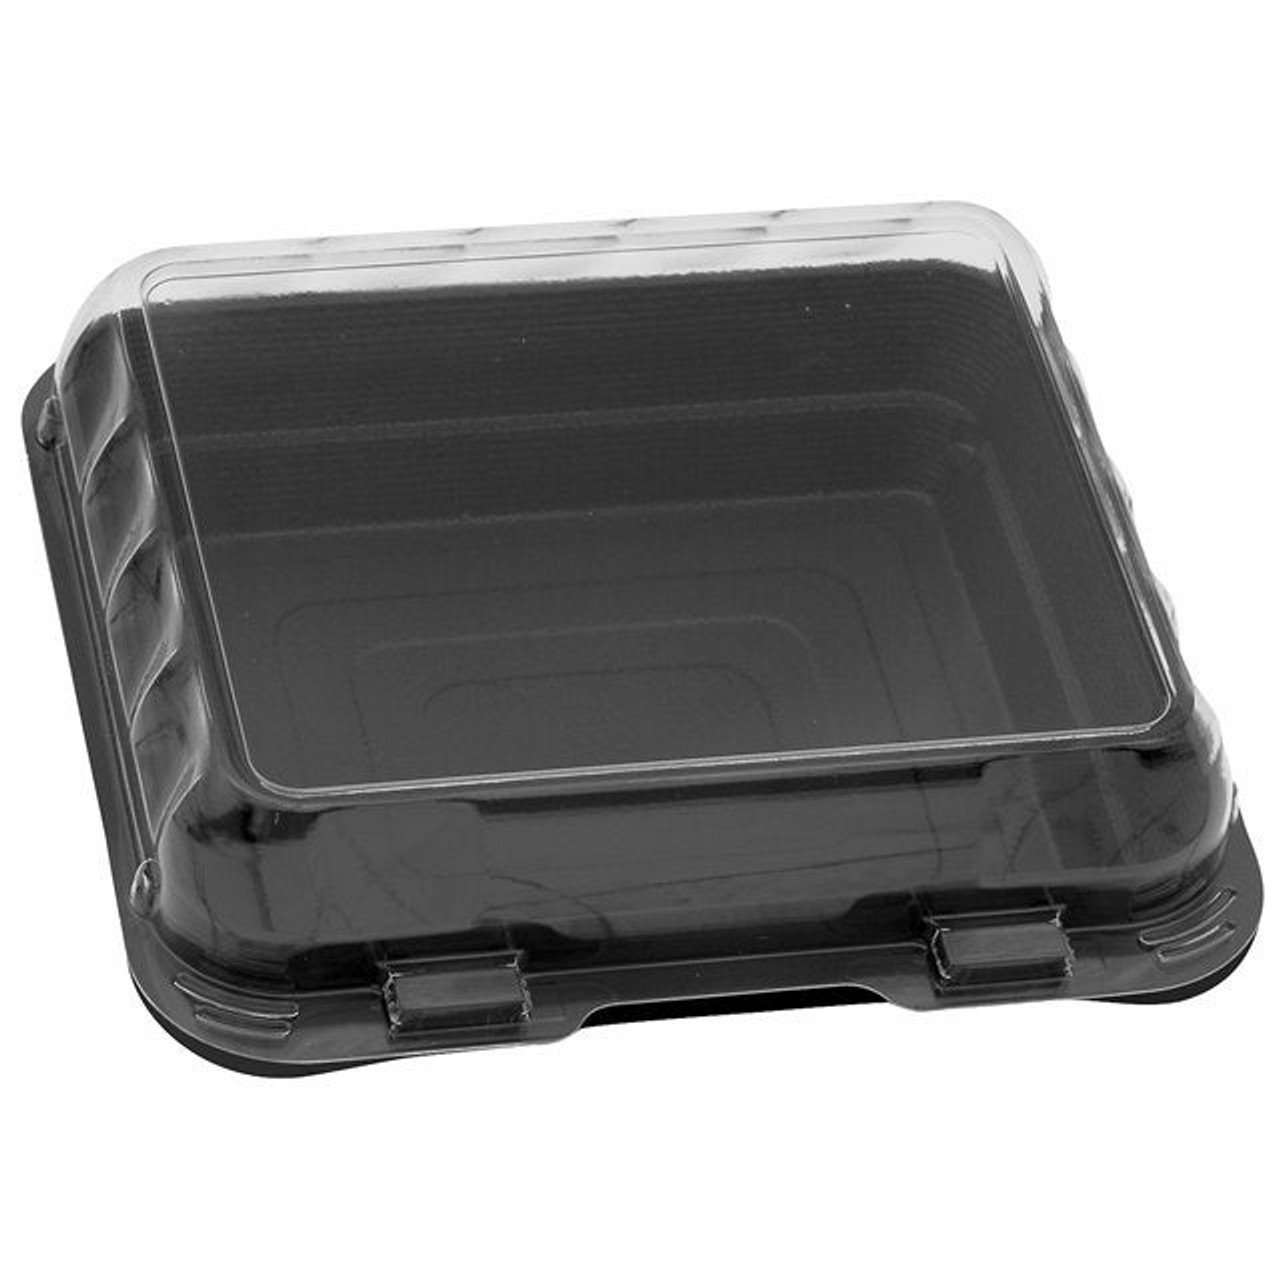 Clearview 18oz Hinged Black And Clear Plastic Snack Containers, 1 Compartment, Smartlock Dual Color, 6X6X2In | 200UN/Unit, 1 Unit/Case